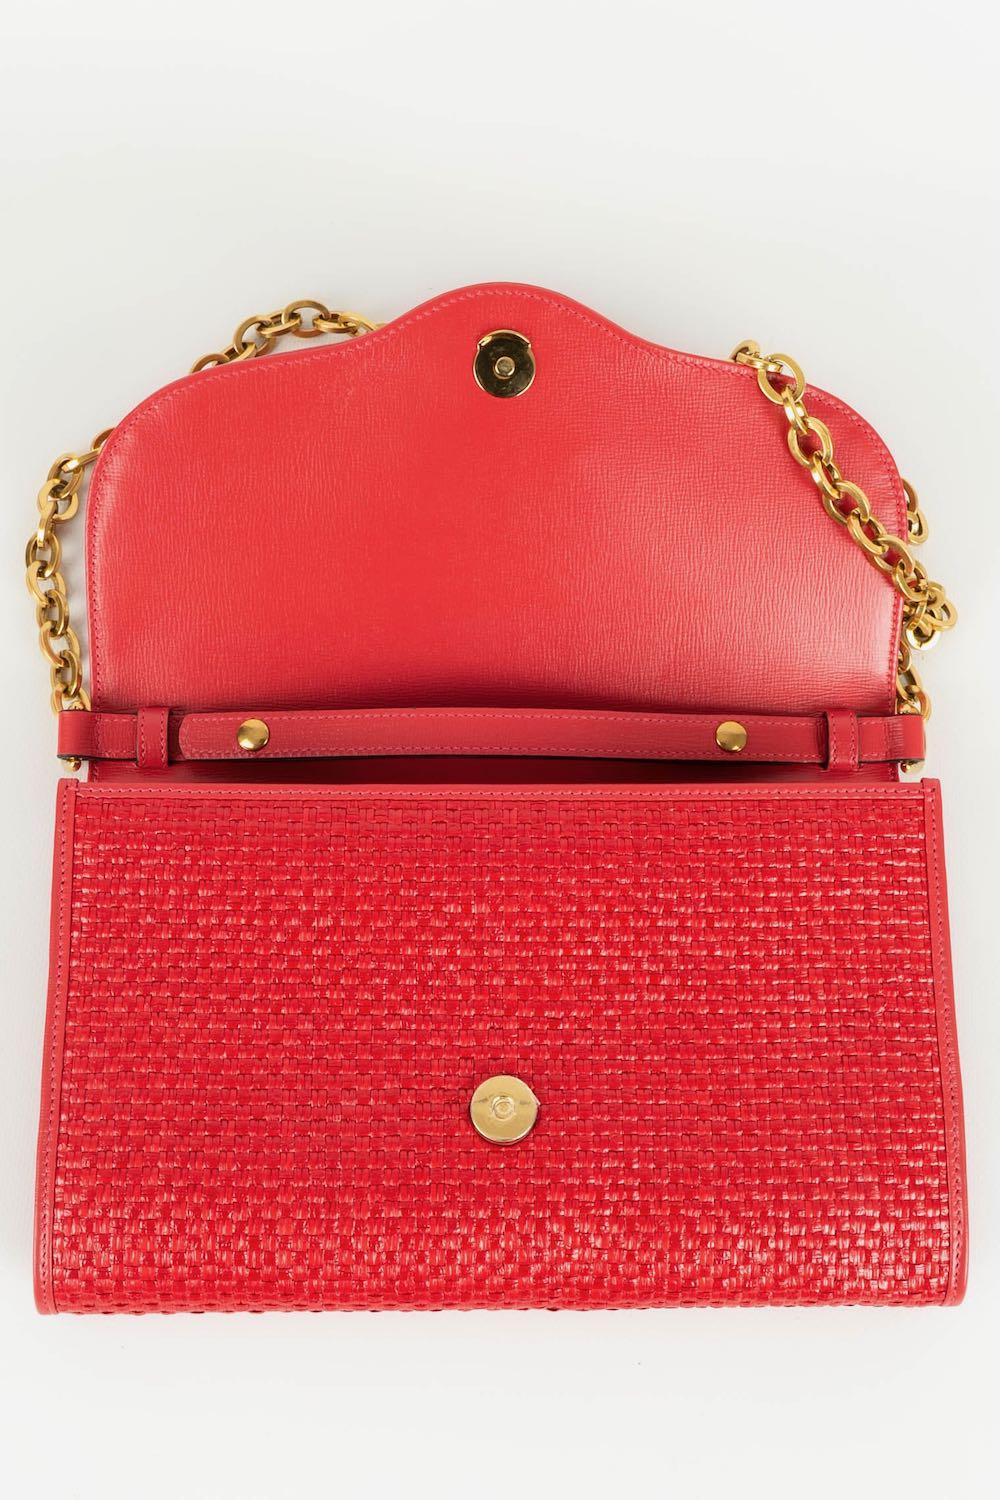 Gucci Red Straw and Leather Bag For Sale 4